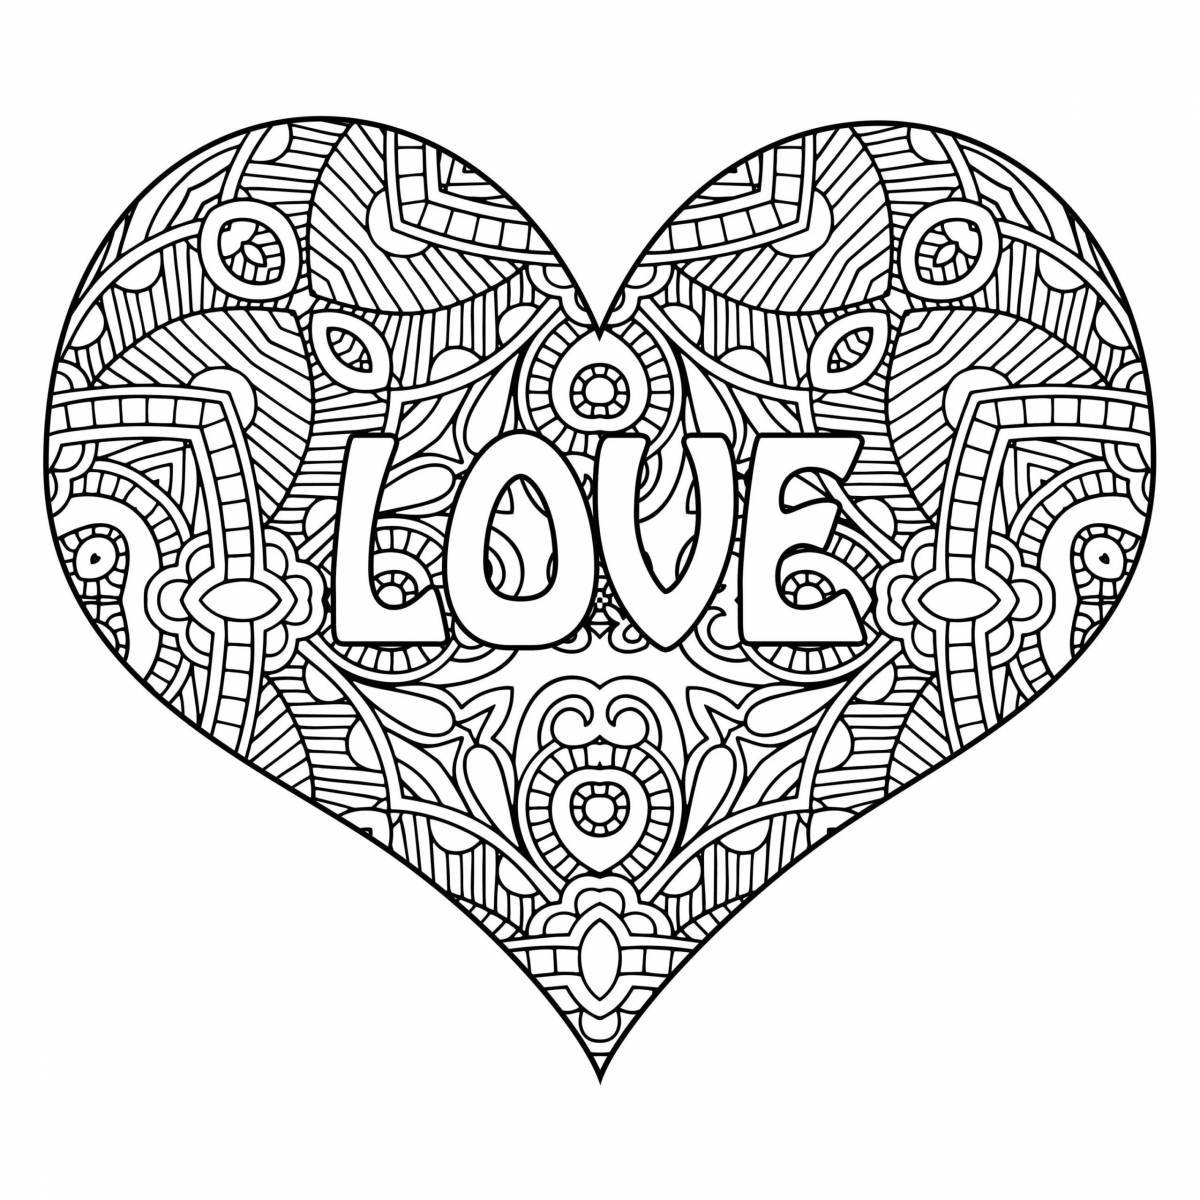 Delightful coloring page 18